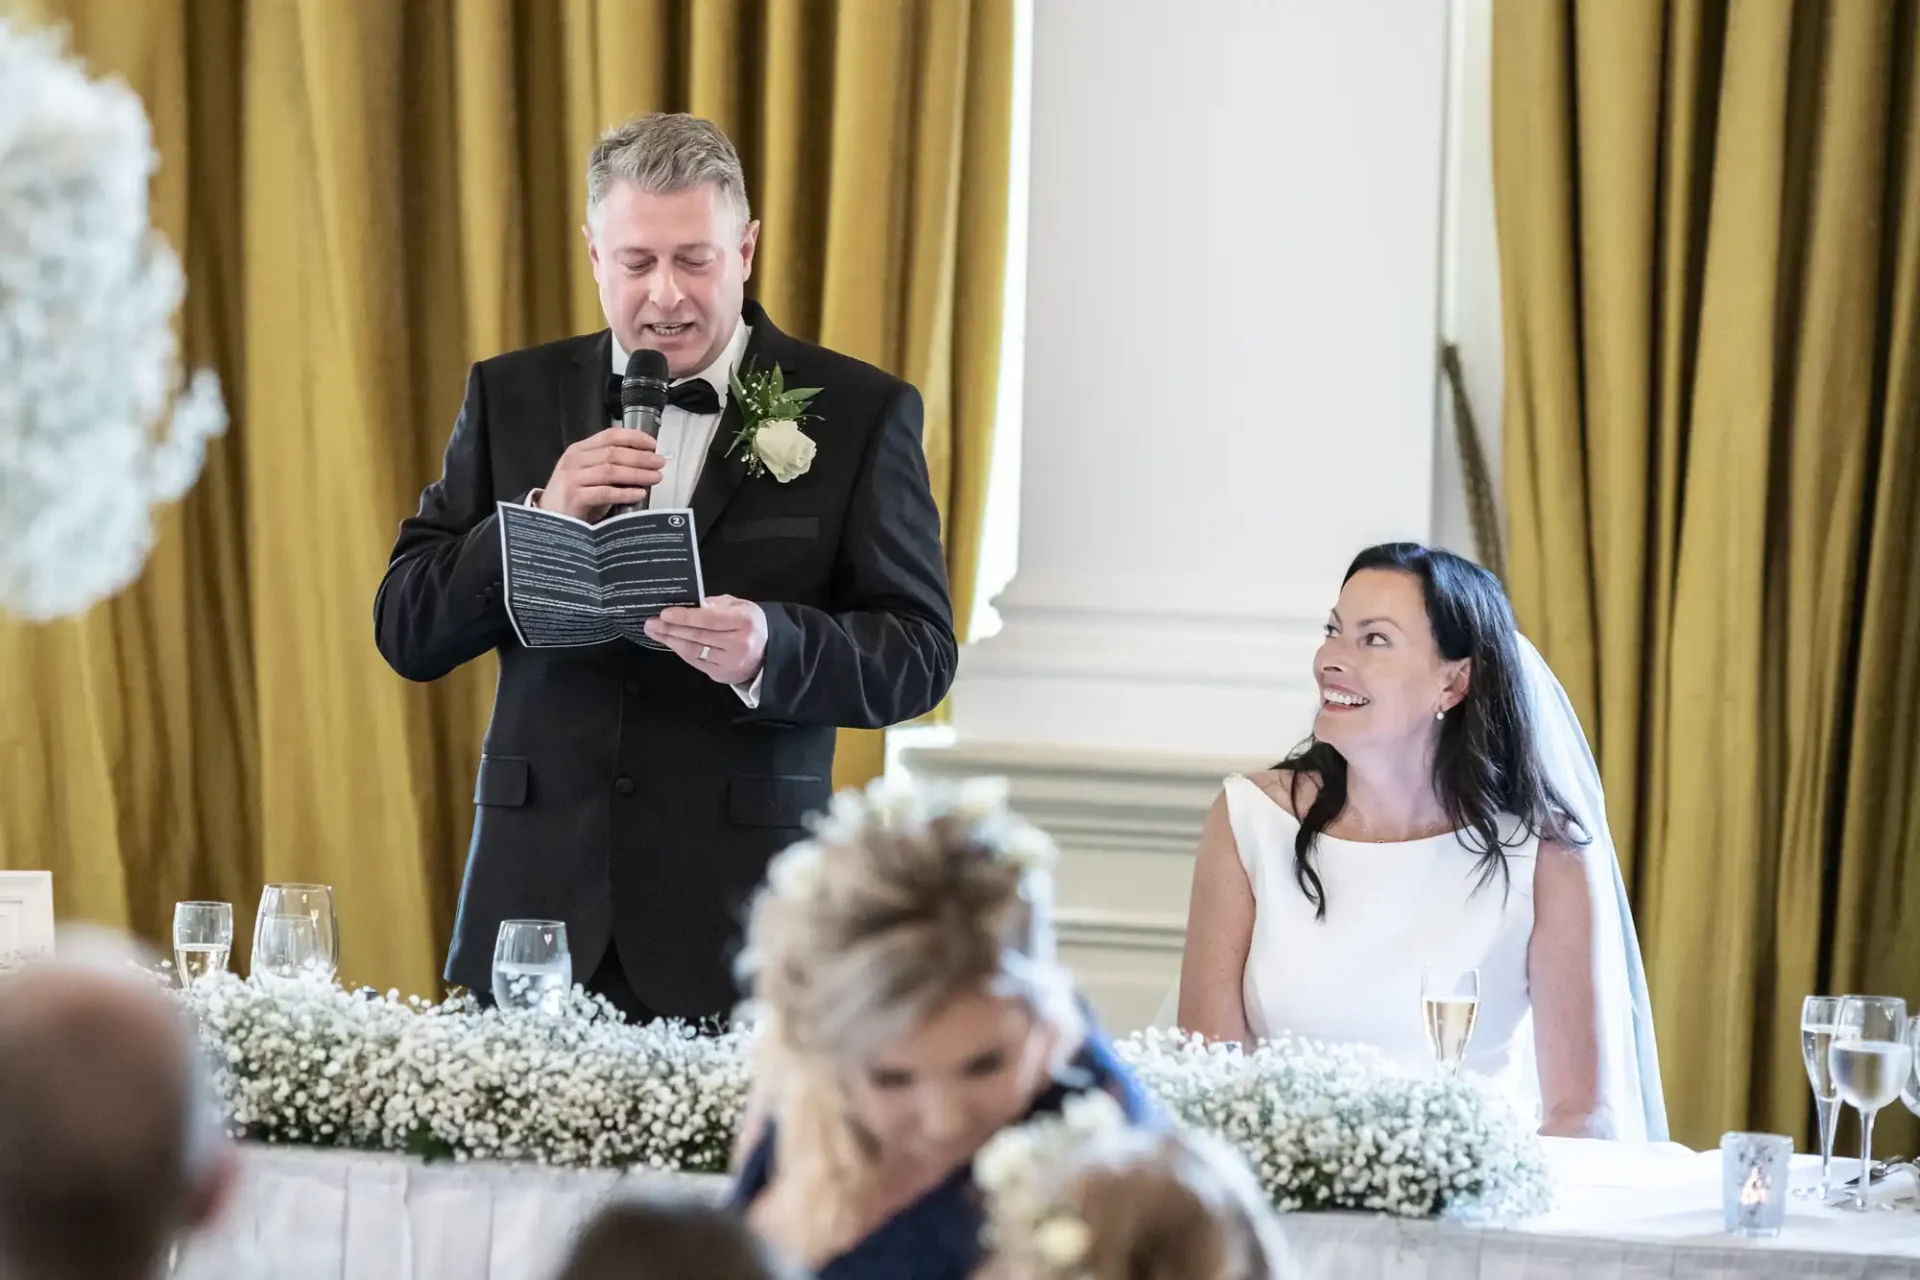 A man in a suit giving a speech at a wedding reception, holding a notebook, as a smiling bride in a white dress listens, surrounded by guests and floral decorations.